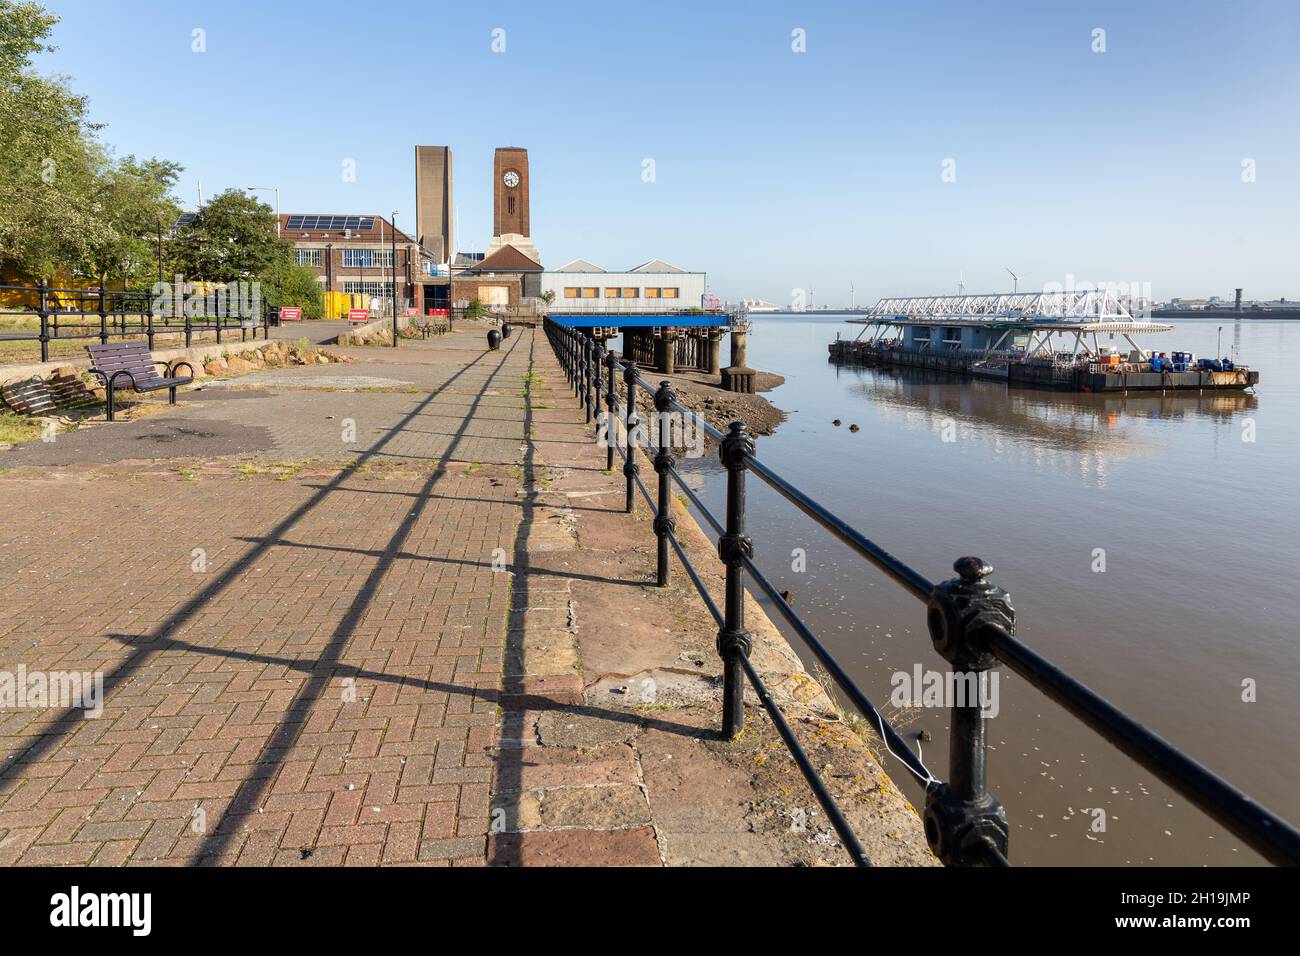 Birkenhead, UK: Promenade at Seacombe Ferry Terminal on River Mersey, main crossing point to Liverpool. Stock Photo